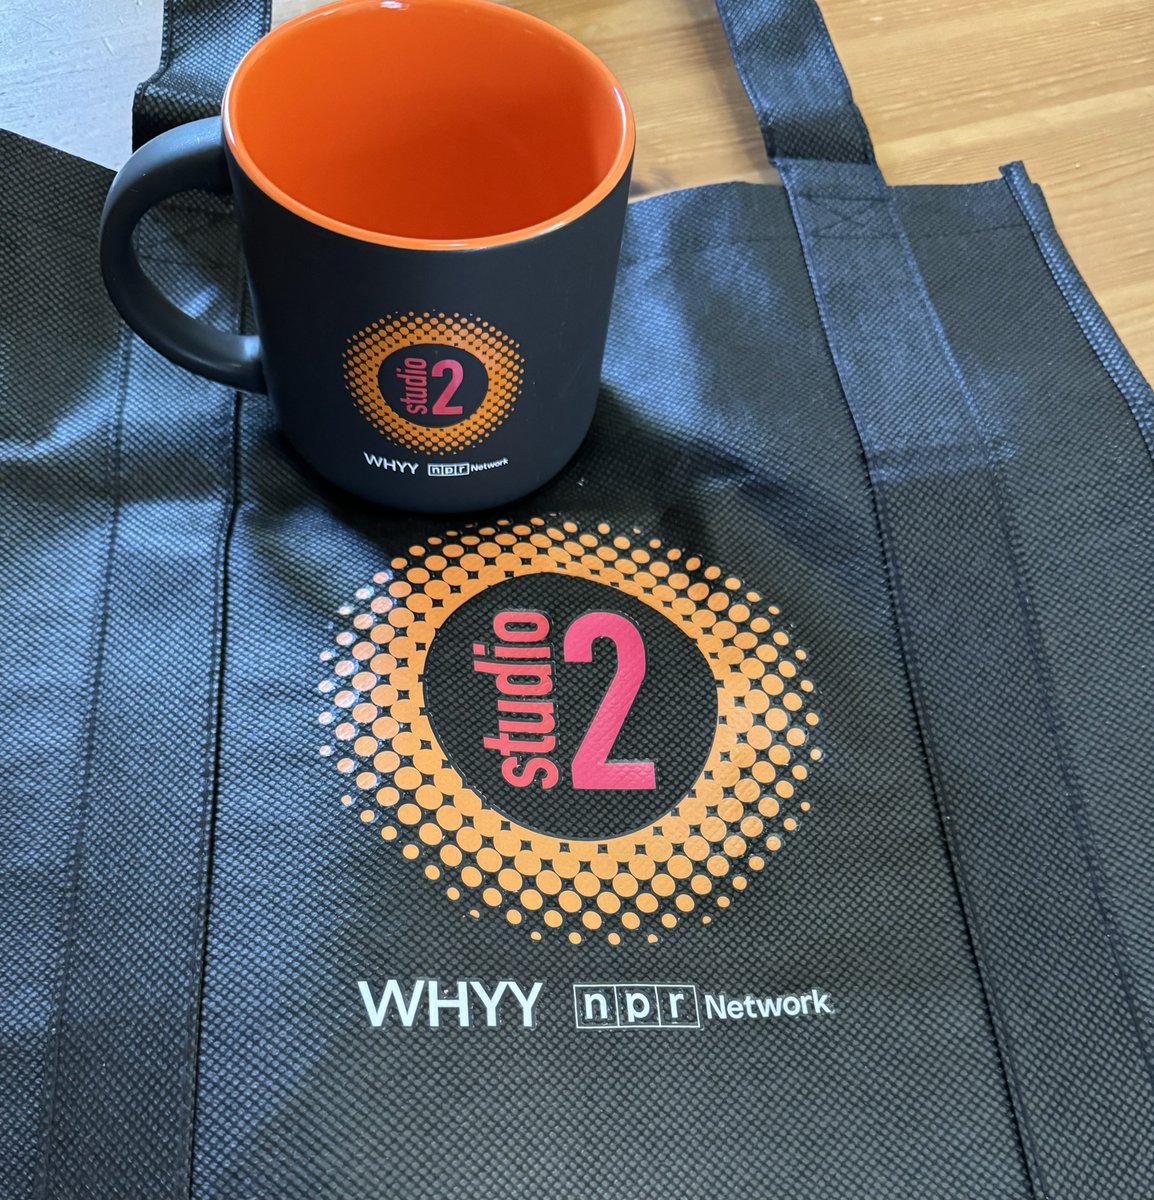 Big day in the Charles household. Got my Studio 2 coffee mug and tote bag for supporting public radio in general and @whyy in particular. Be sure to check out Studio 2 with @cherrigregg and @Avi_WA. It’s an amazing locally produced program.